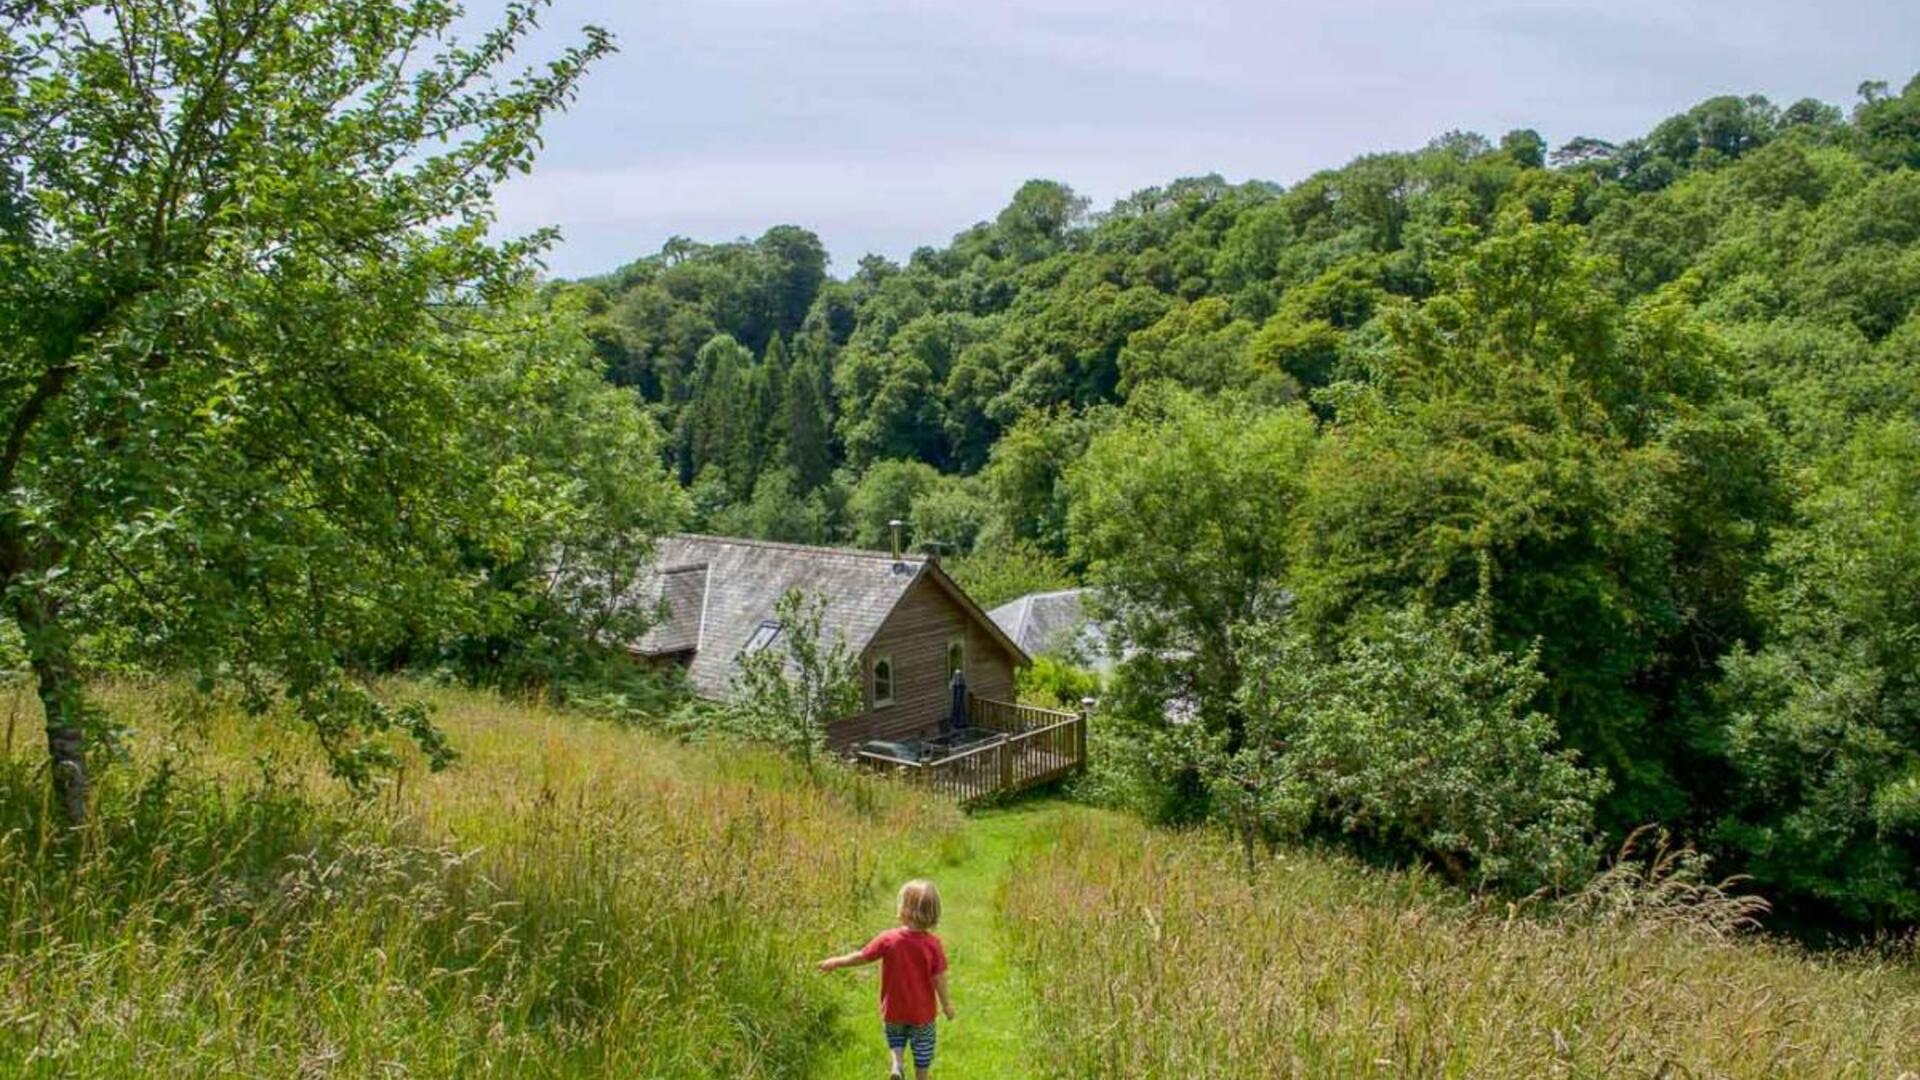 Holiday Tots - Flear Farm Cottages